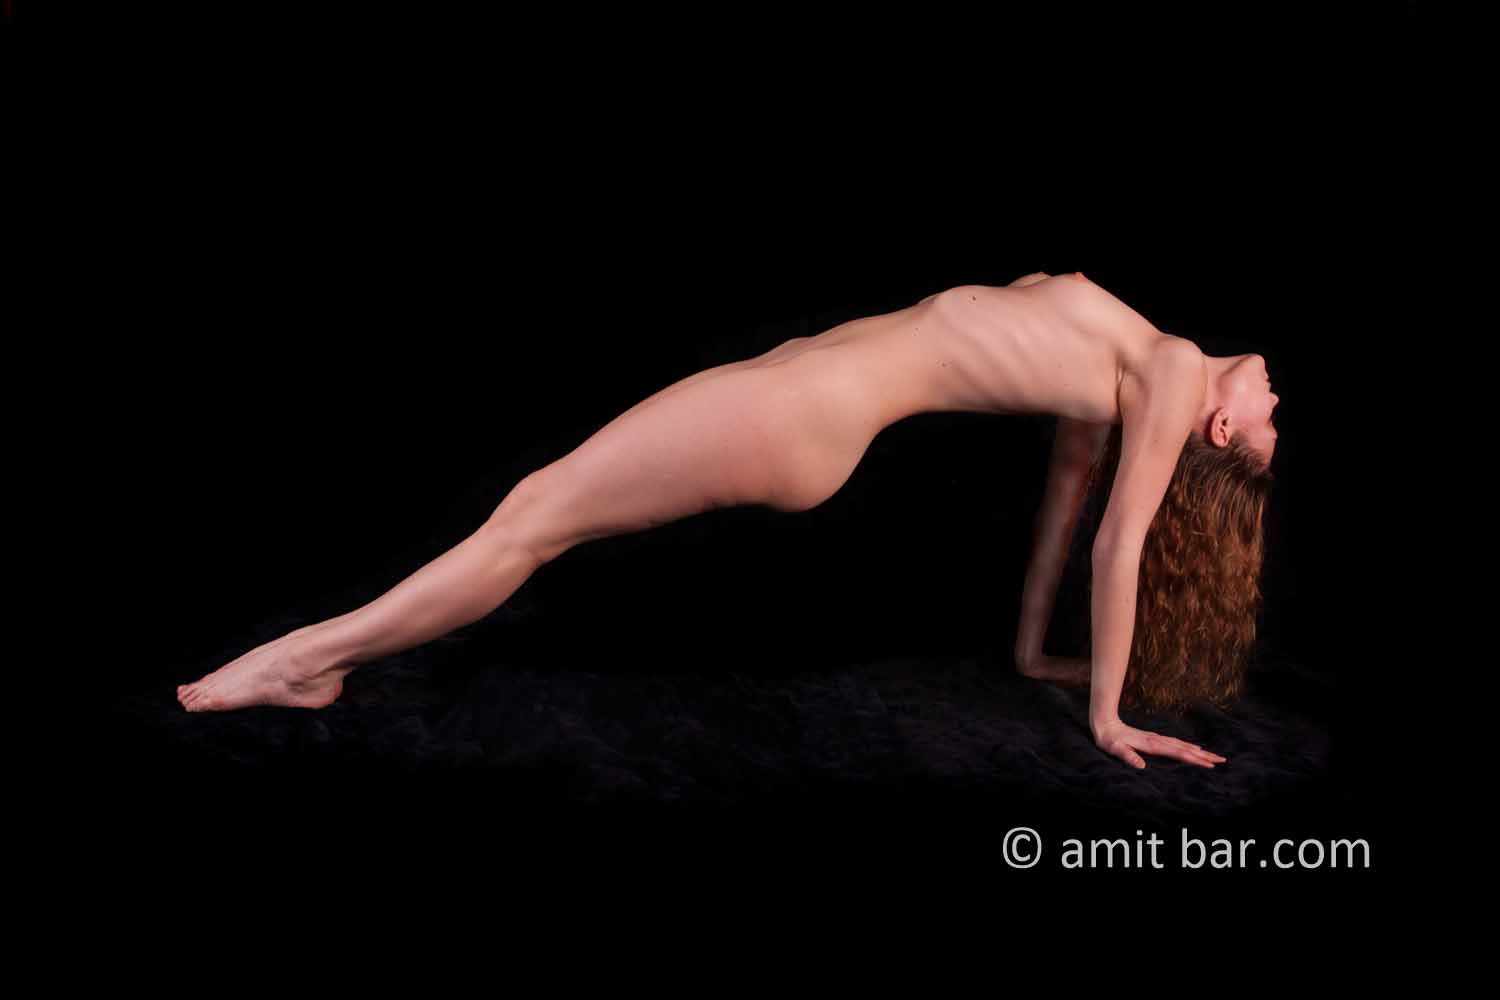 Streched IV: Nude model is streched on the floor